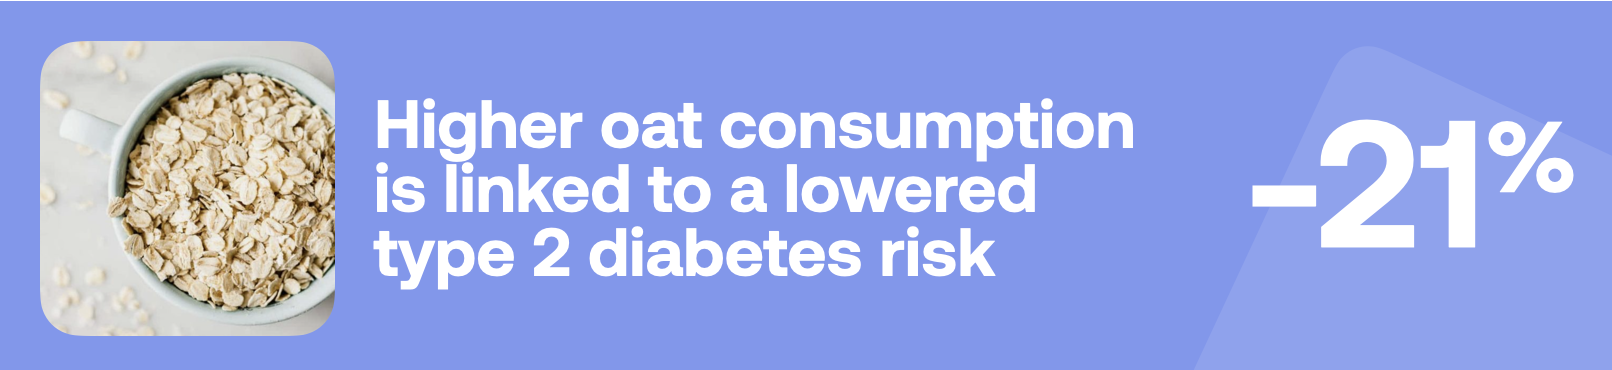 Higher oat consumption is linked to a lowered type 2 diabetes risk -21%